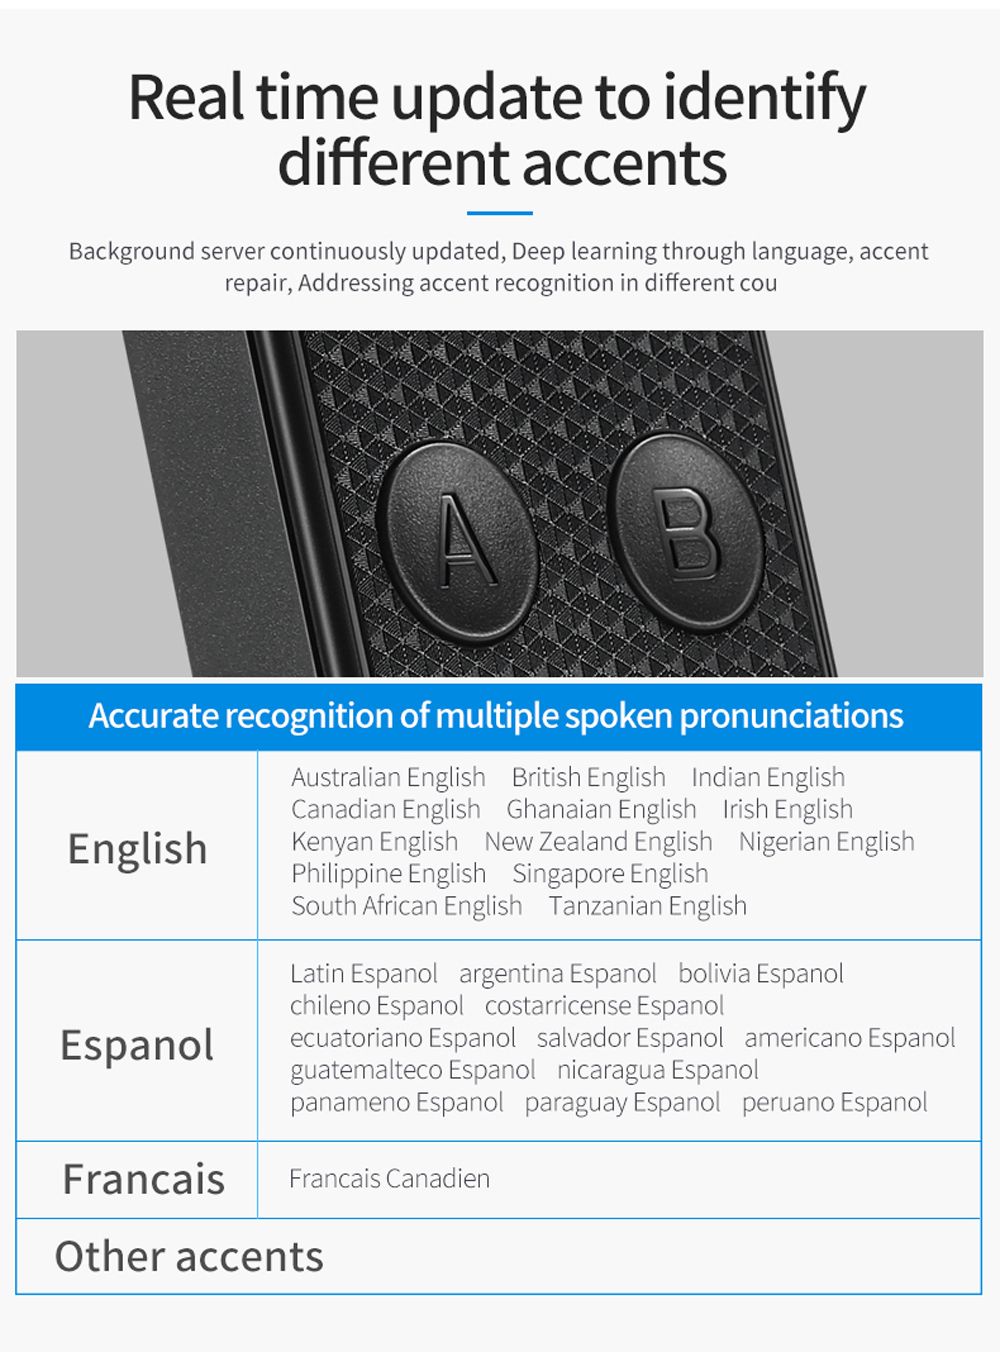 K6-24G-WiFi-bluetoooth-40-Portable-Multi-language-Two-way-Instant-Voice-Translator-Support-Android-a-1654215